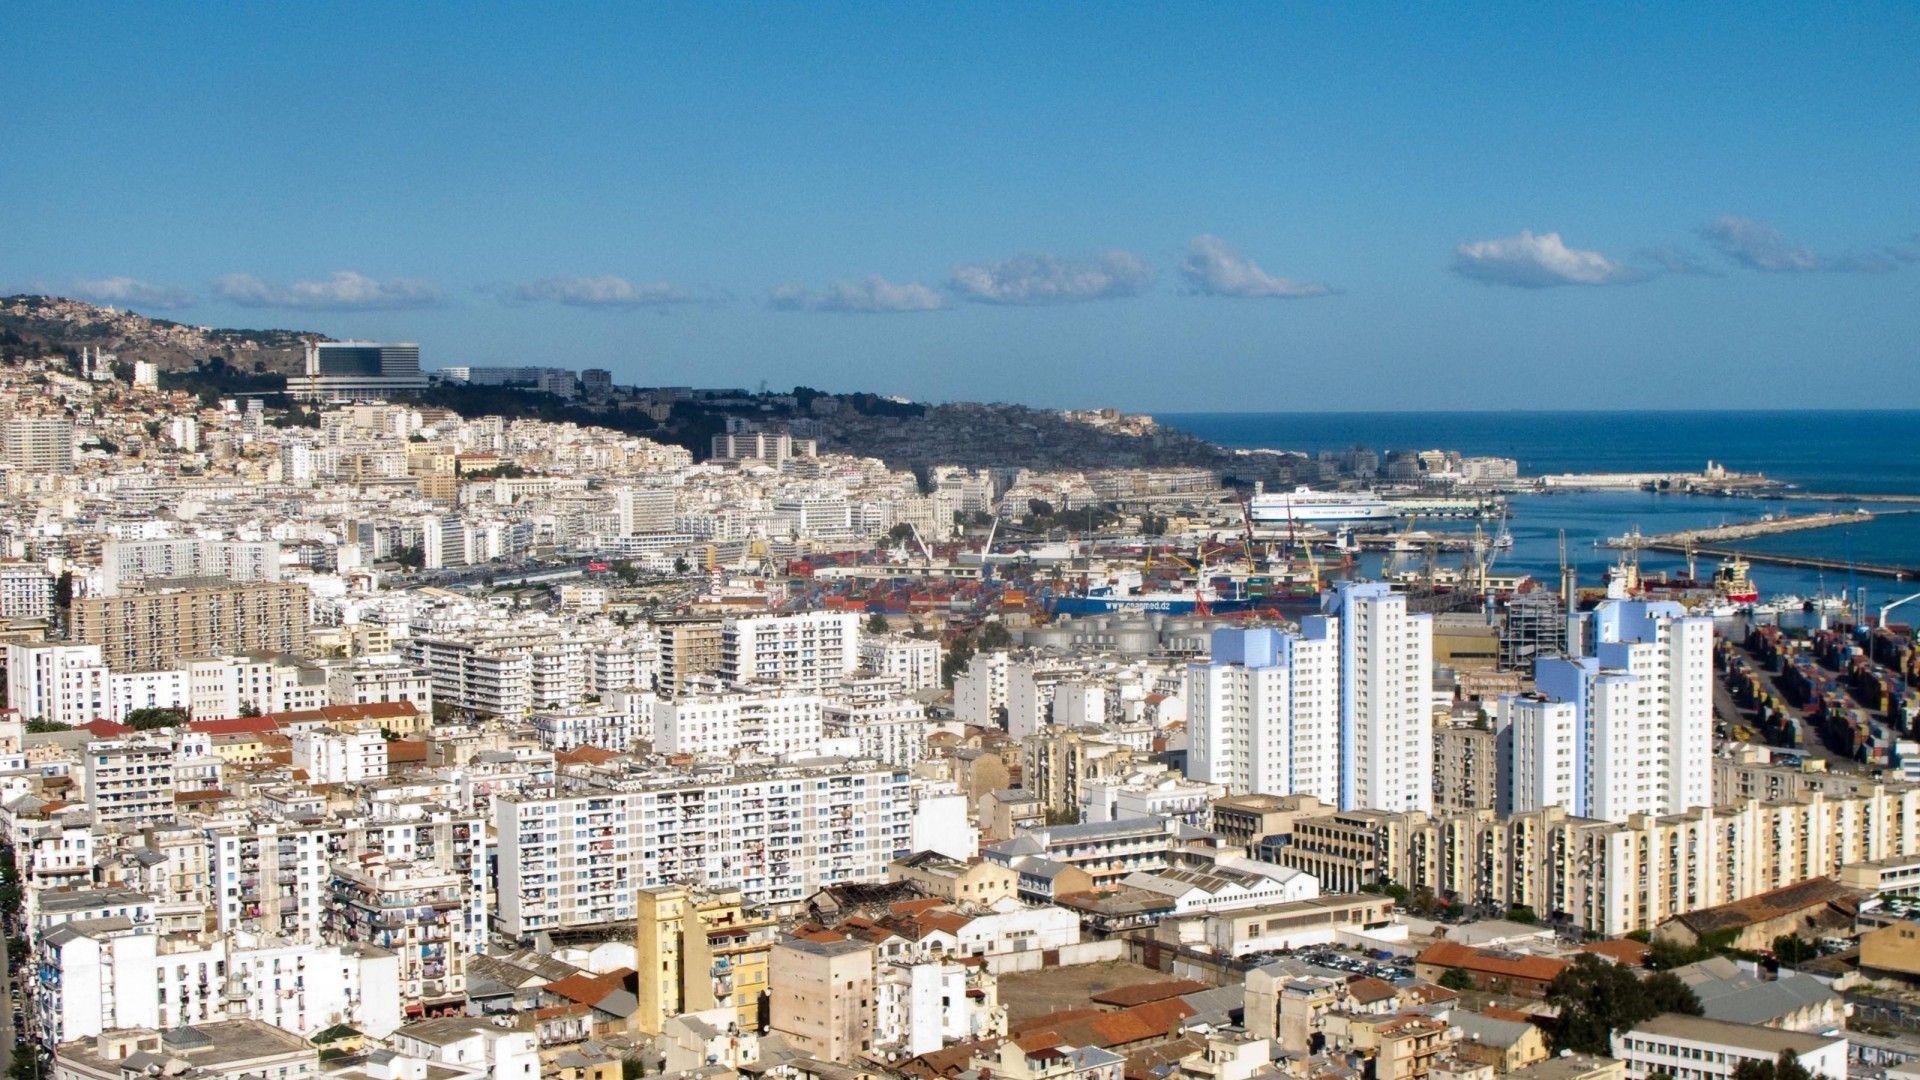 Algiers wallpapers, Top free backgrounds, Urban cityscape, Architectural wonders, 1920x1080 Full HD Desktop